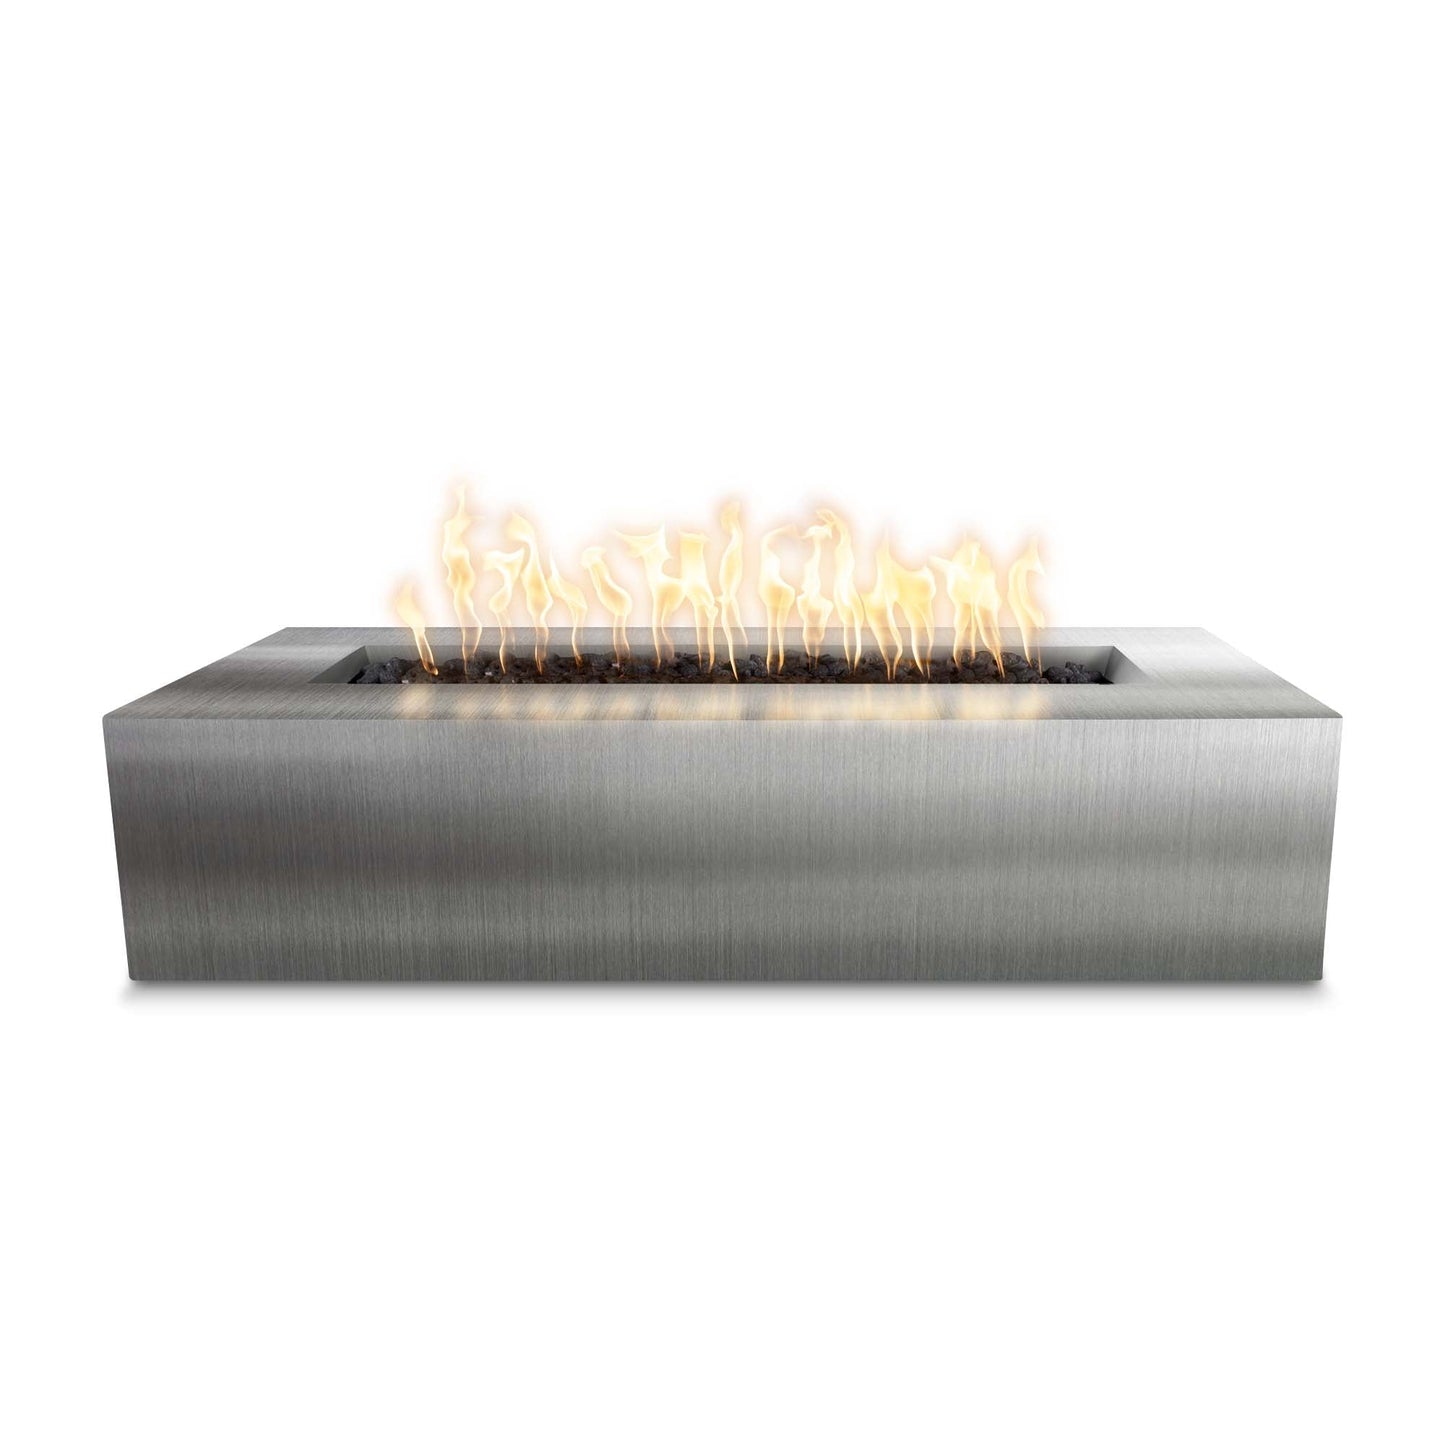 The Outdoor Plus Rectangular Regal 54" Hammered Copper Liquid Propane Fire Pit with Match Lit Ignition